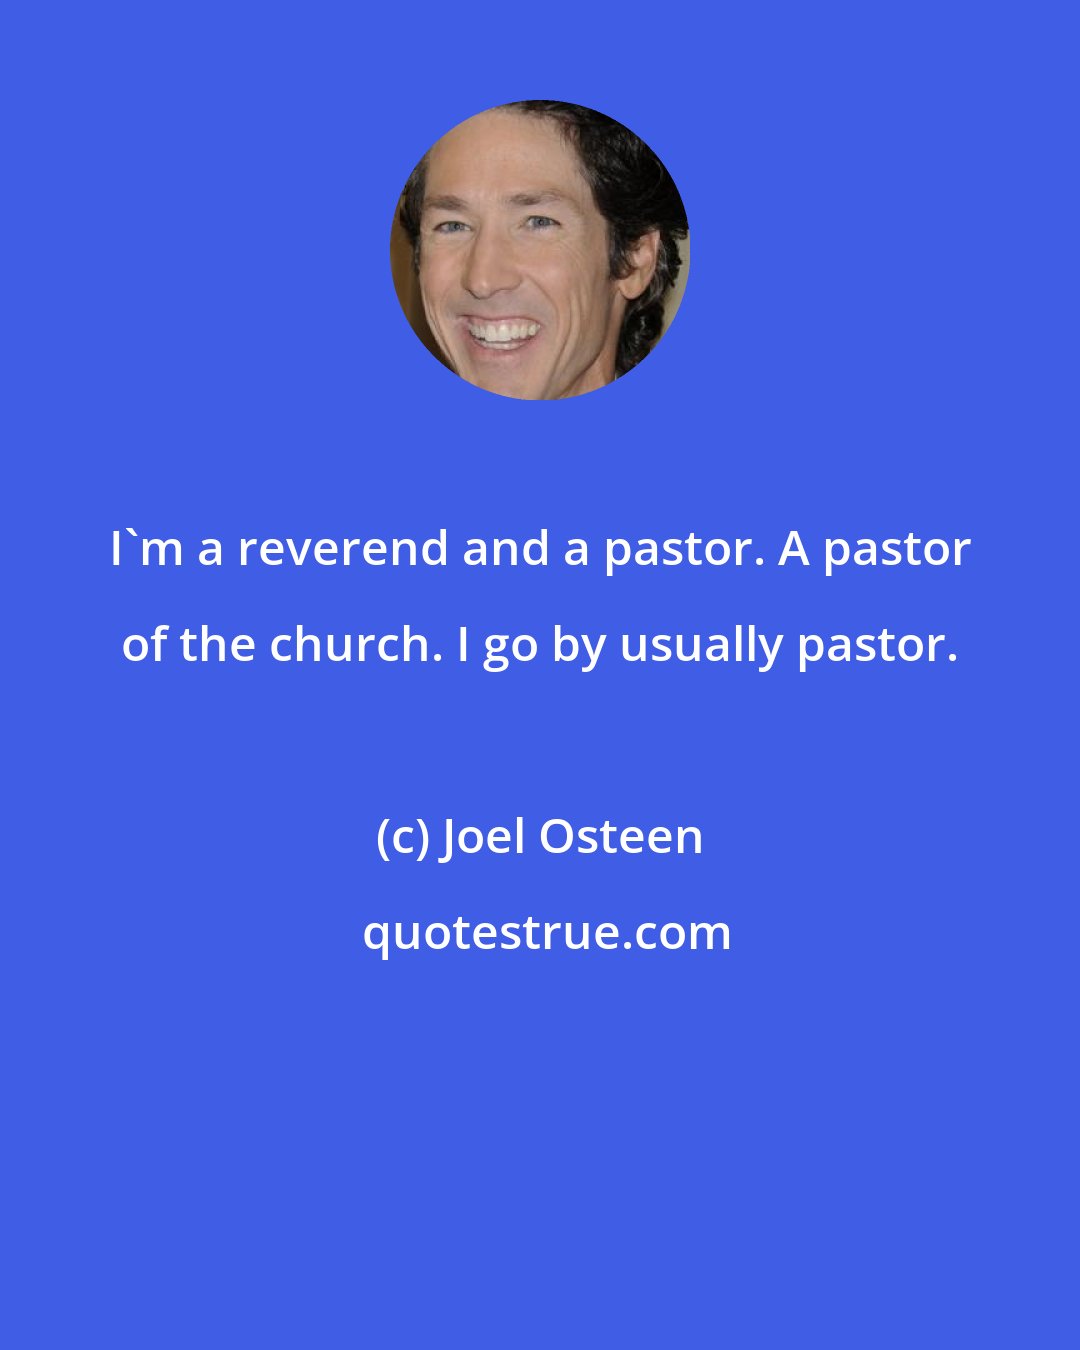 Joel Osteen: I'm a reverend and a pastor. A pastor of the church. I go by usually pastor.